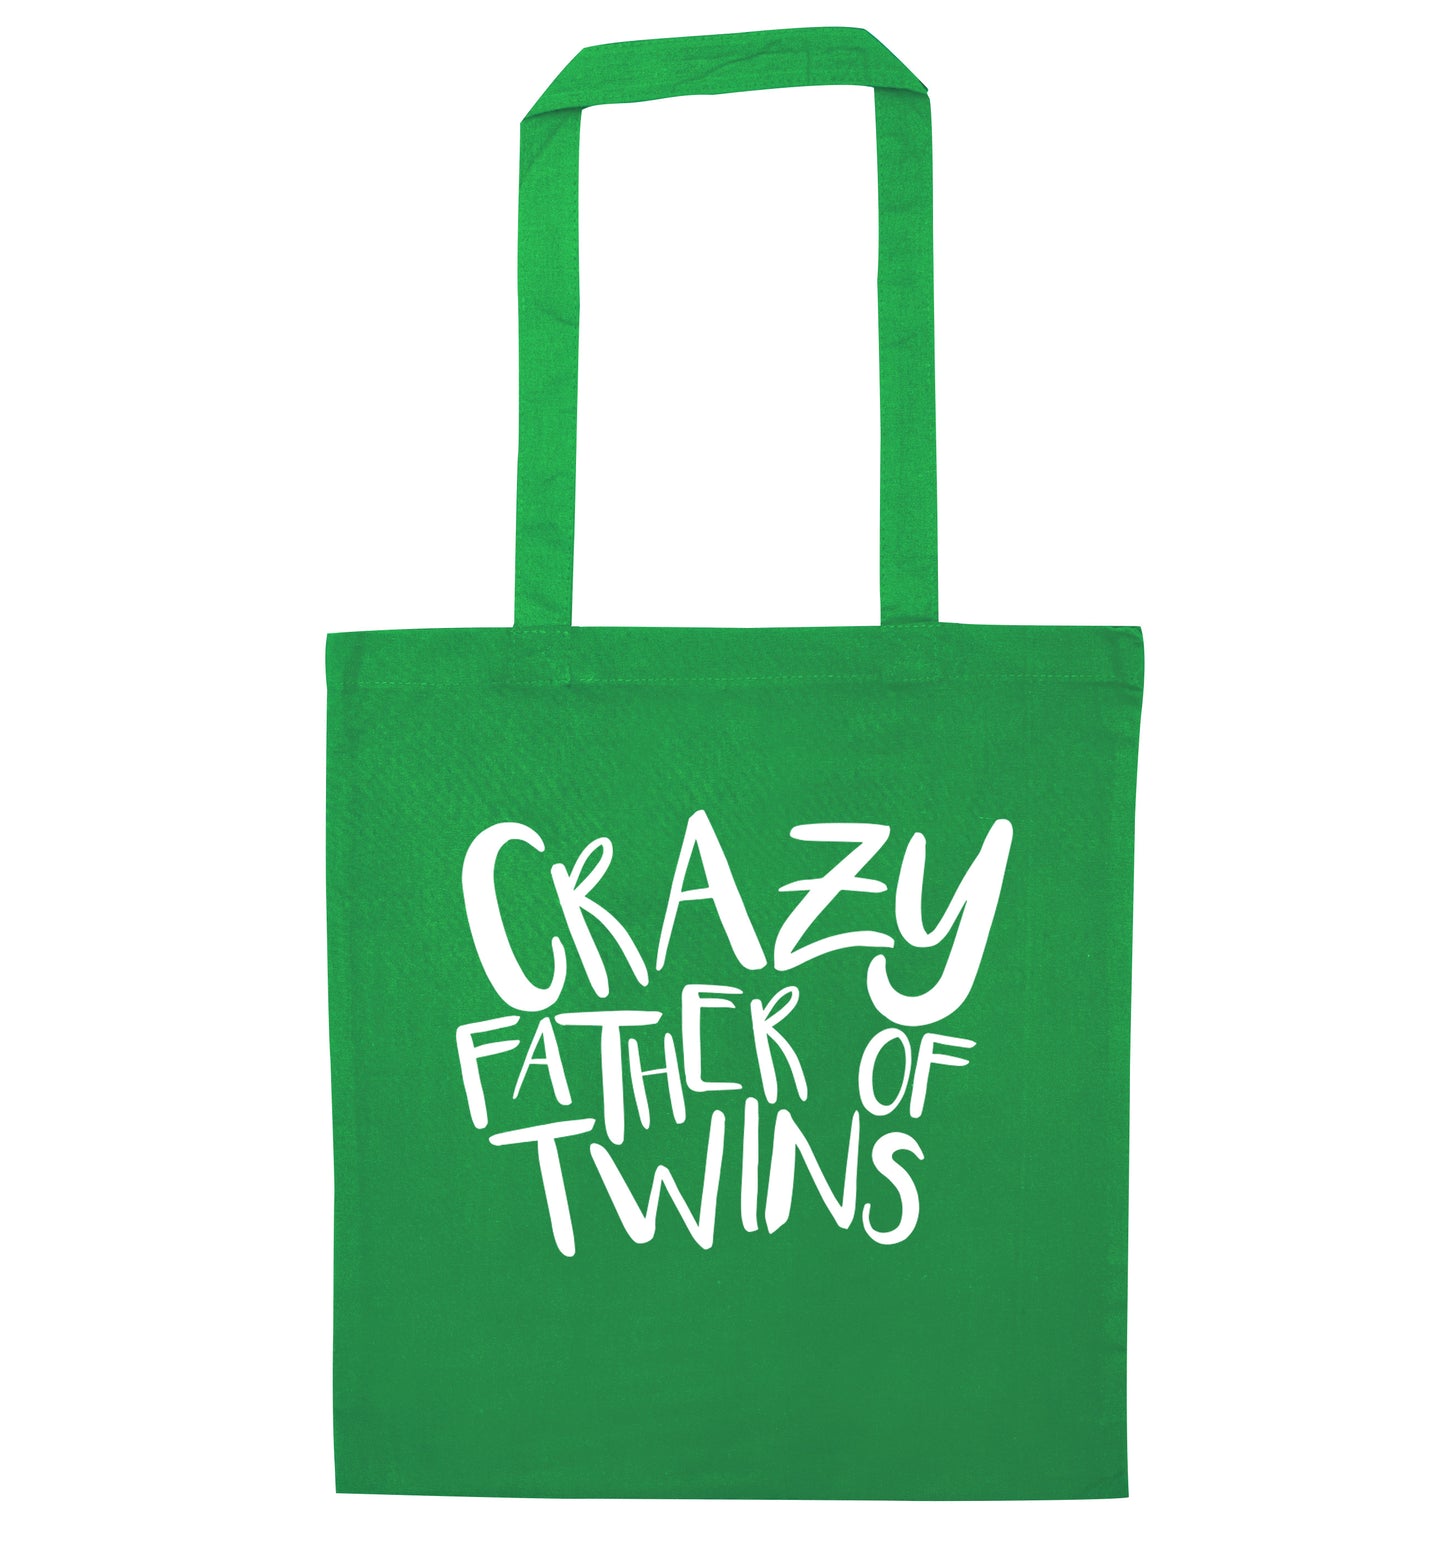 Crazy father of twins green tote bag